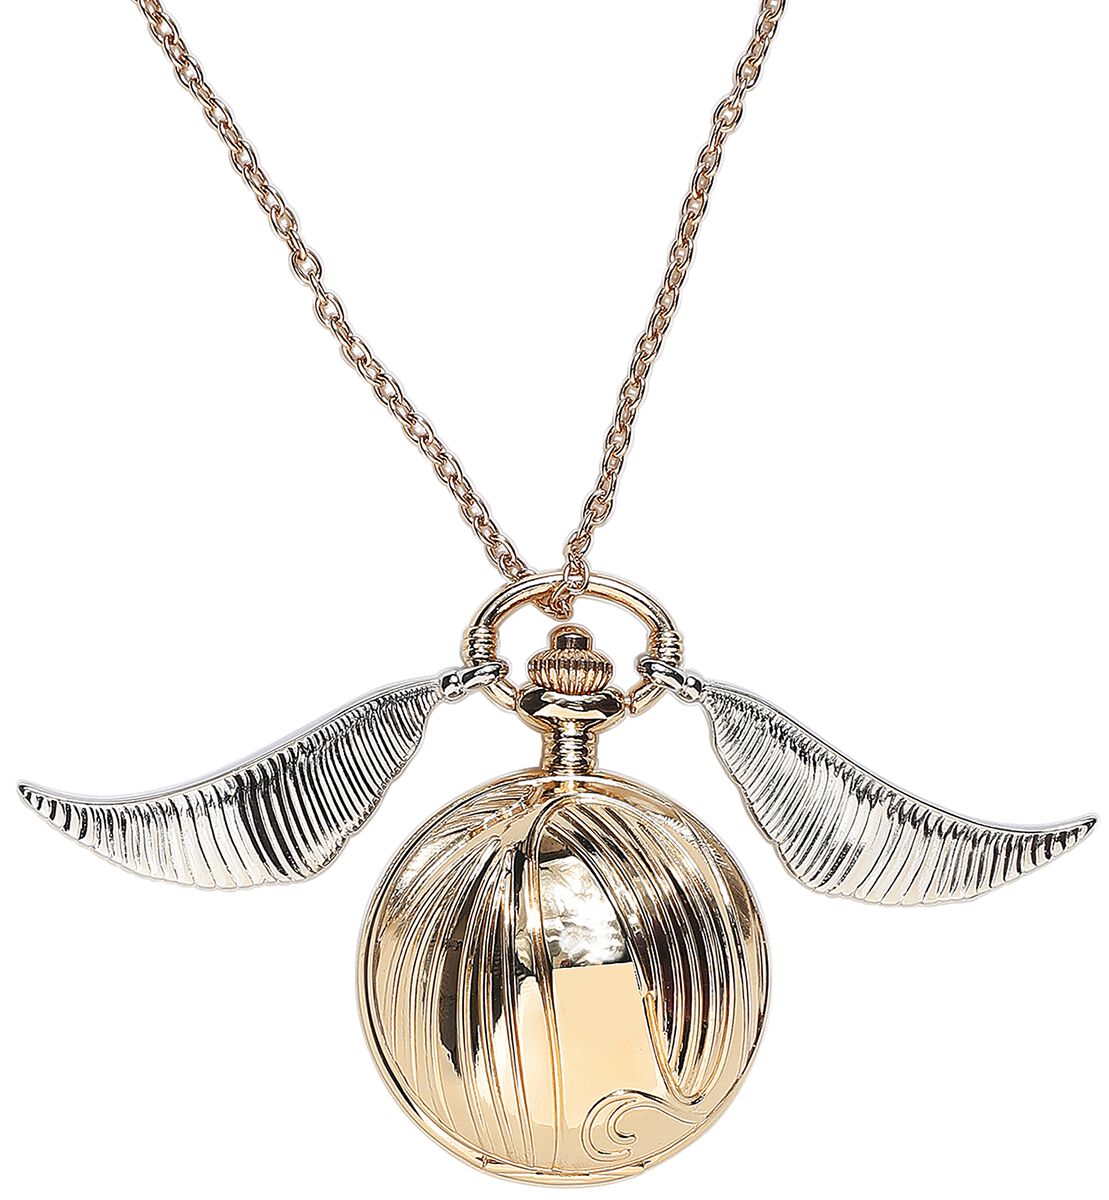 Harry Potter - Golden Snitch - Necklace Watch - Gold-coloured